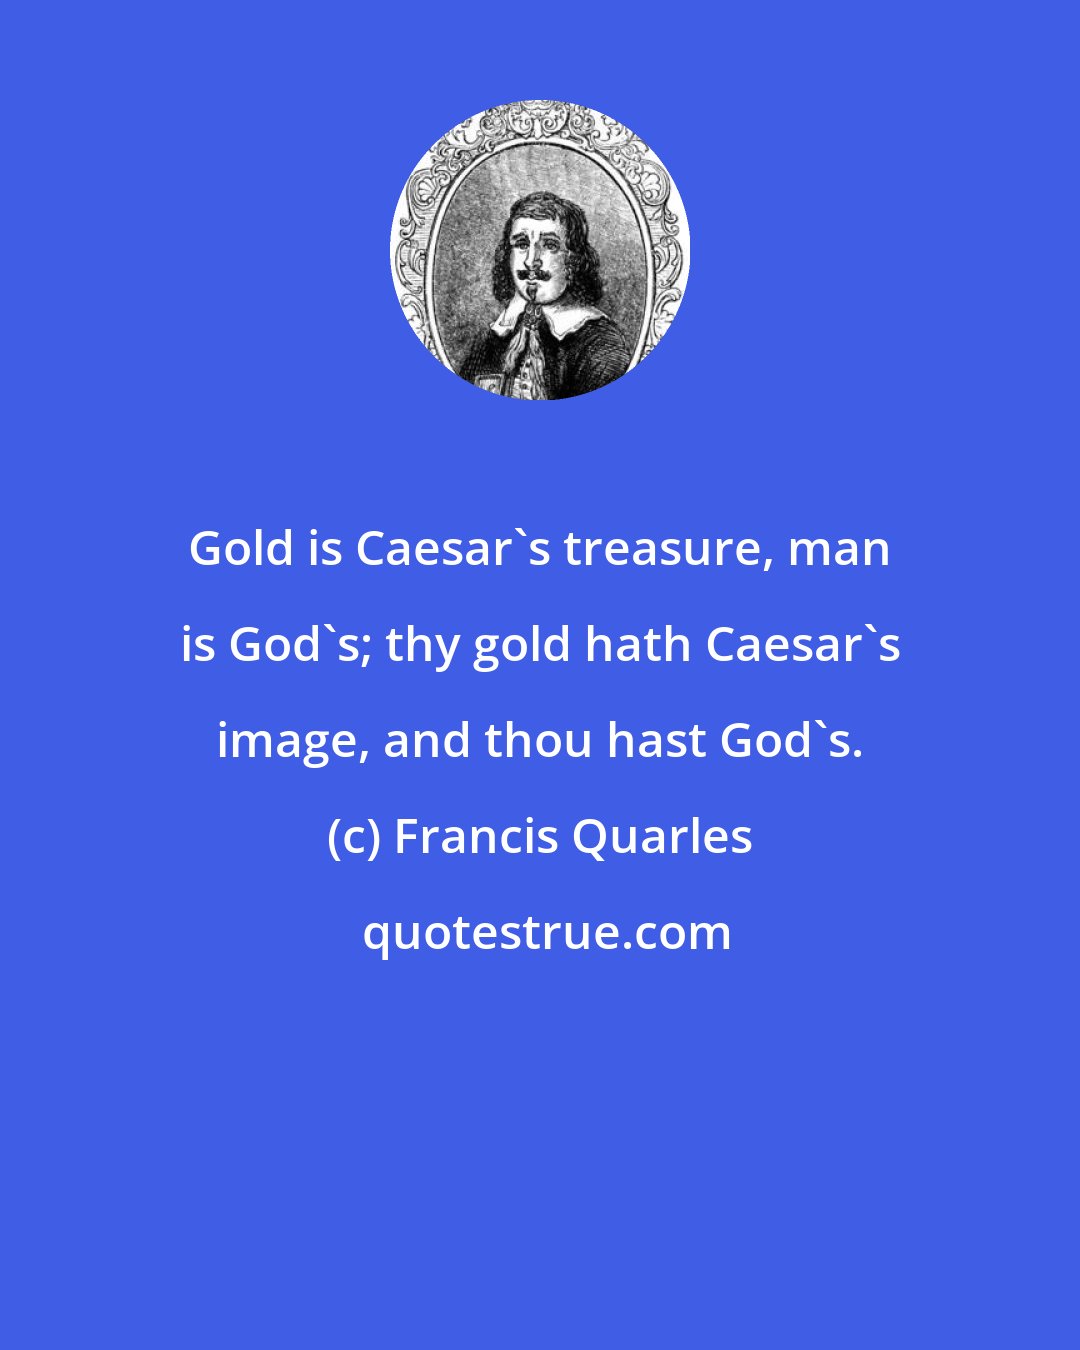 Francis Quarles: Gold is Caesar's treasure, man is God's; thy gold hath Caesar's image, and thou hast God's.